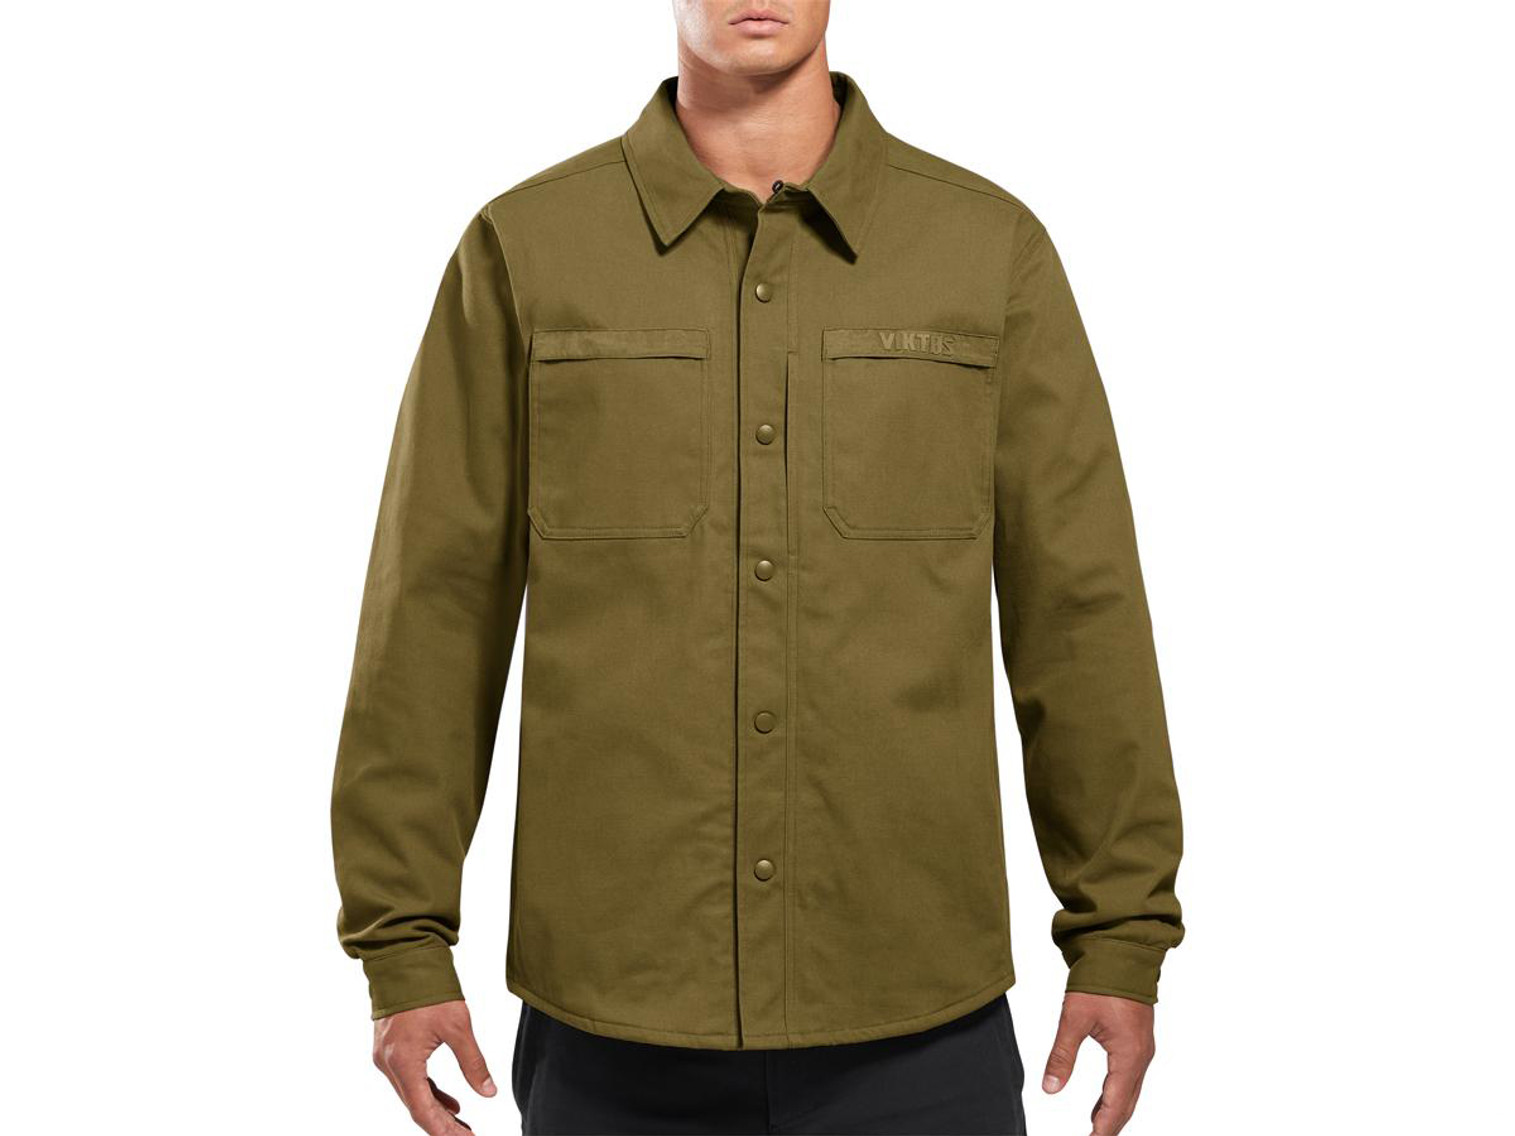 Viktos "CONTRACTOR AF" Weather Resistant Insulated Jacket (Color: Spartan / X-Large)